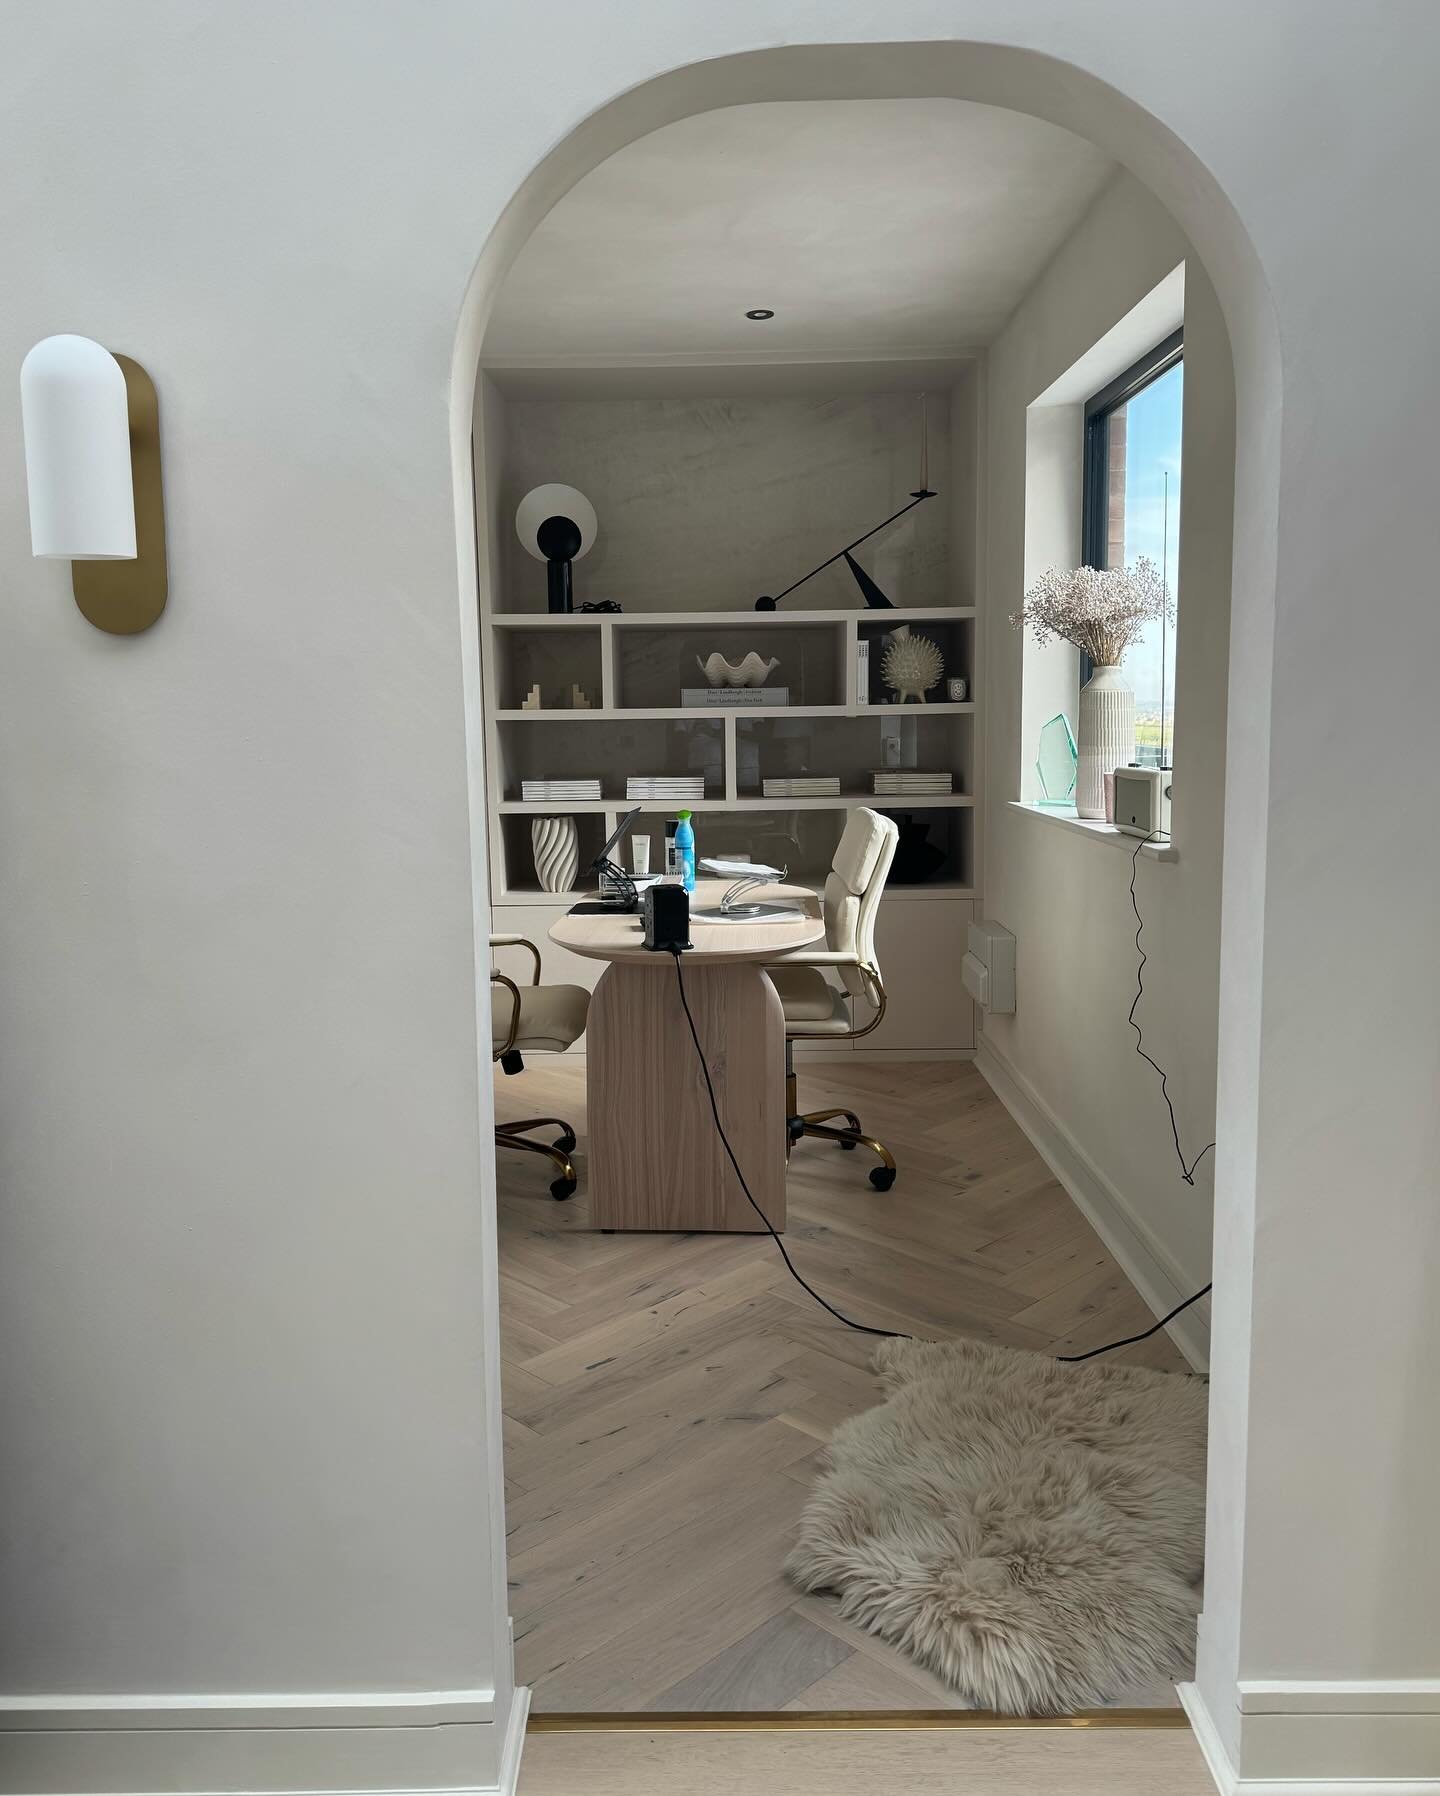 The arches really elevate this home office space. We finished it with @bauwerkcolour Limewash in Mykonos. Design by @dhilnawaazinteriordesignstudio and @as.interiordesign_